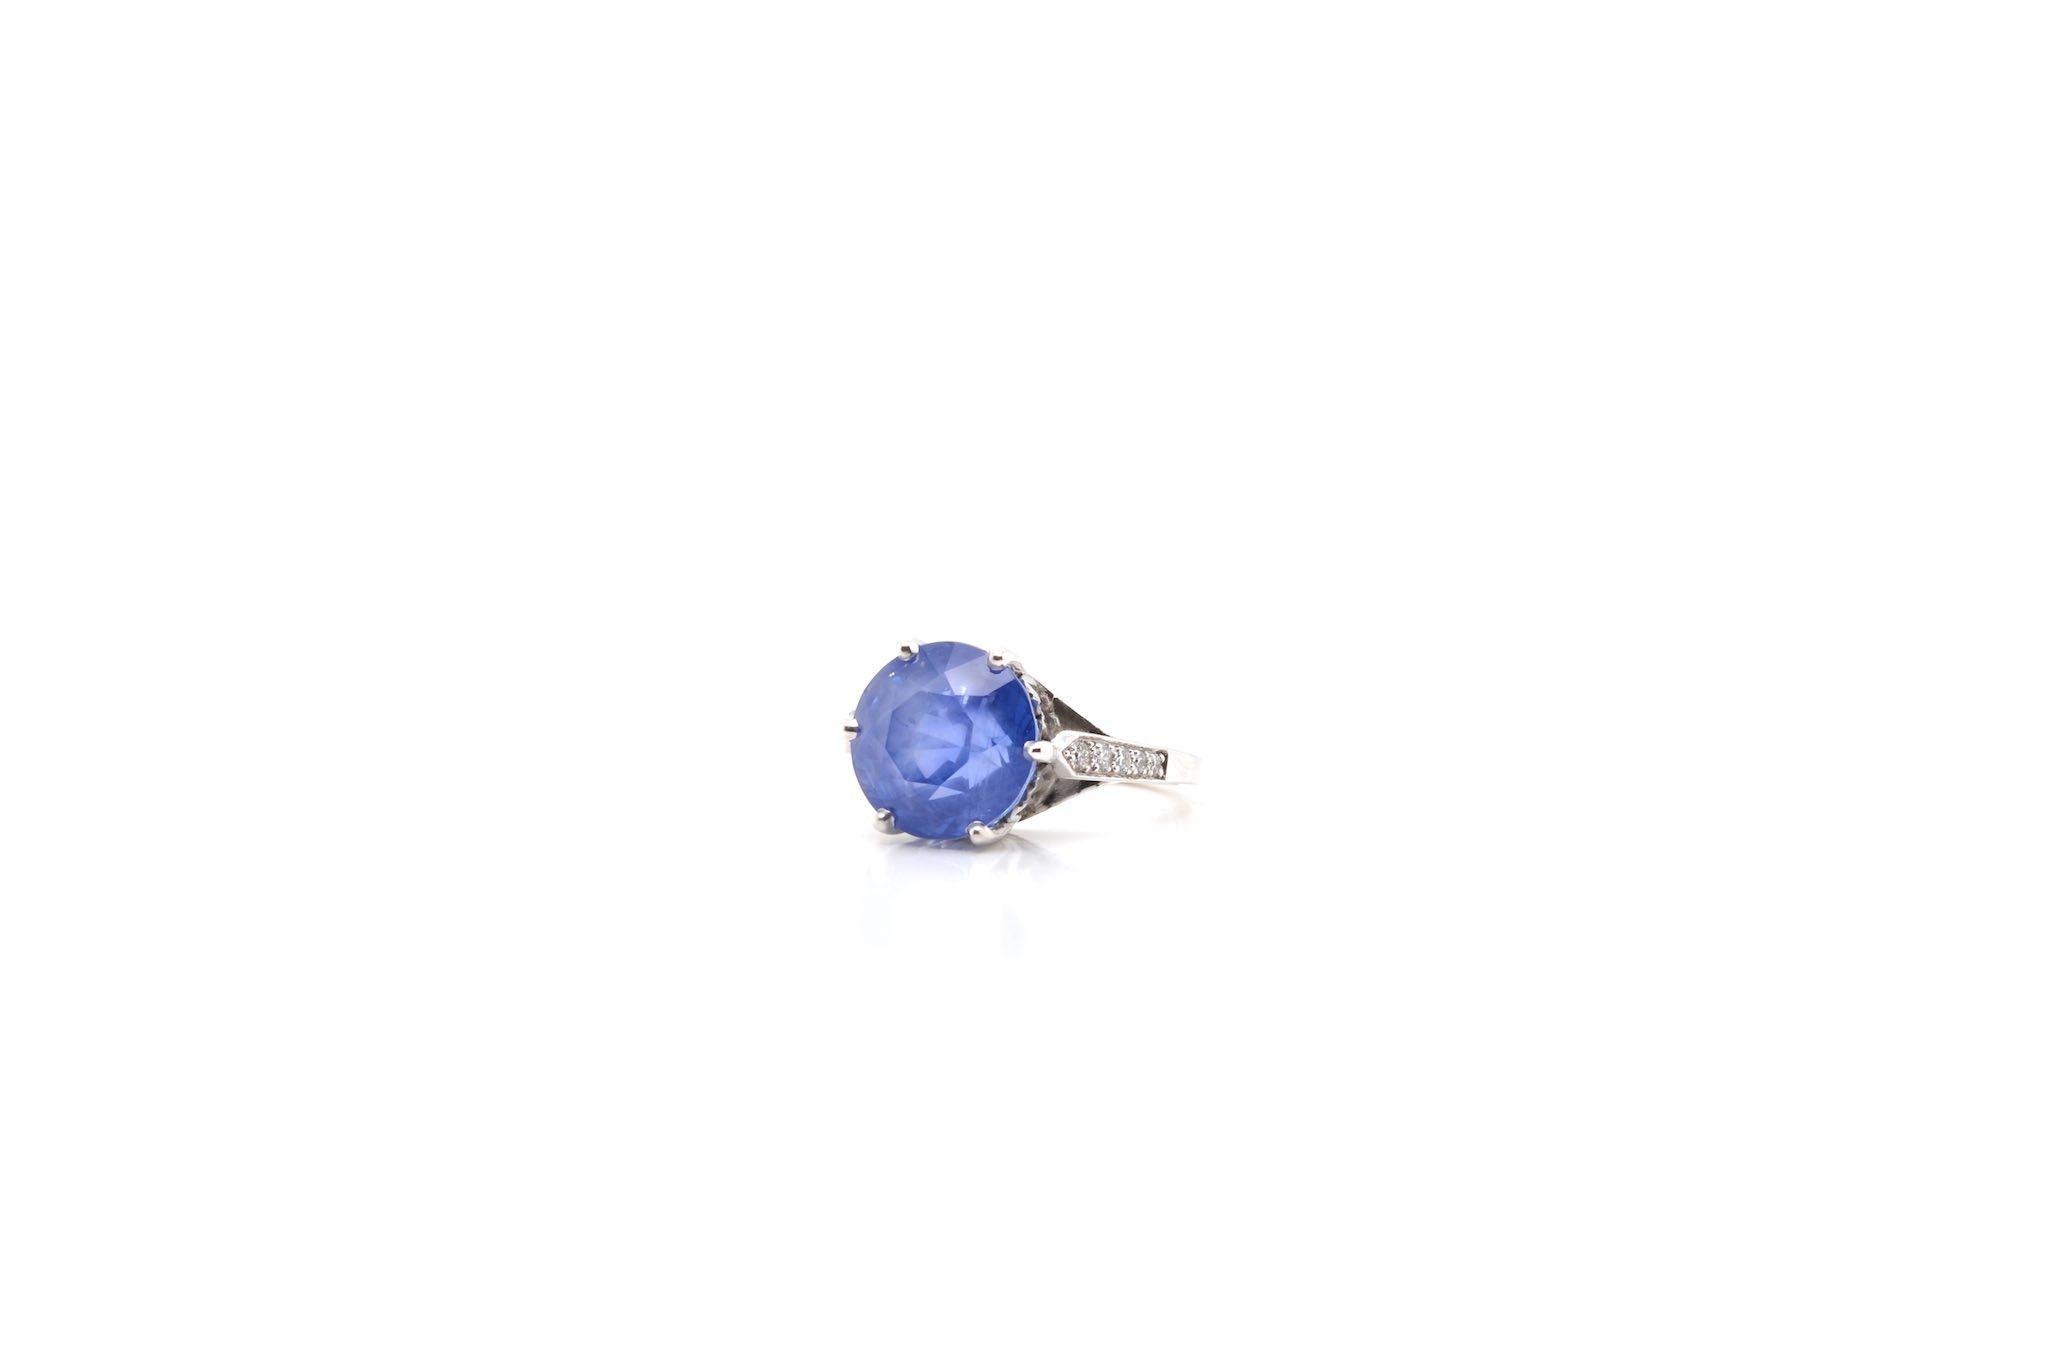 Stones: 10.48 carat unheated Ceylon Sapphire
and brilliant cut diamonds for a total weight of 0.35 carats.
Material: Platinum
Dimensions: 12mm in diameter and 9mm in height
Weight: 6.2g
Size: 53 (free sizing)
Certificate
Ref. : 24054 / 24743